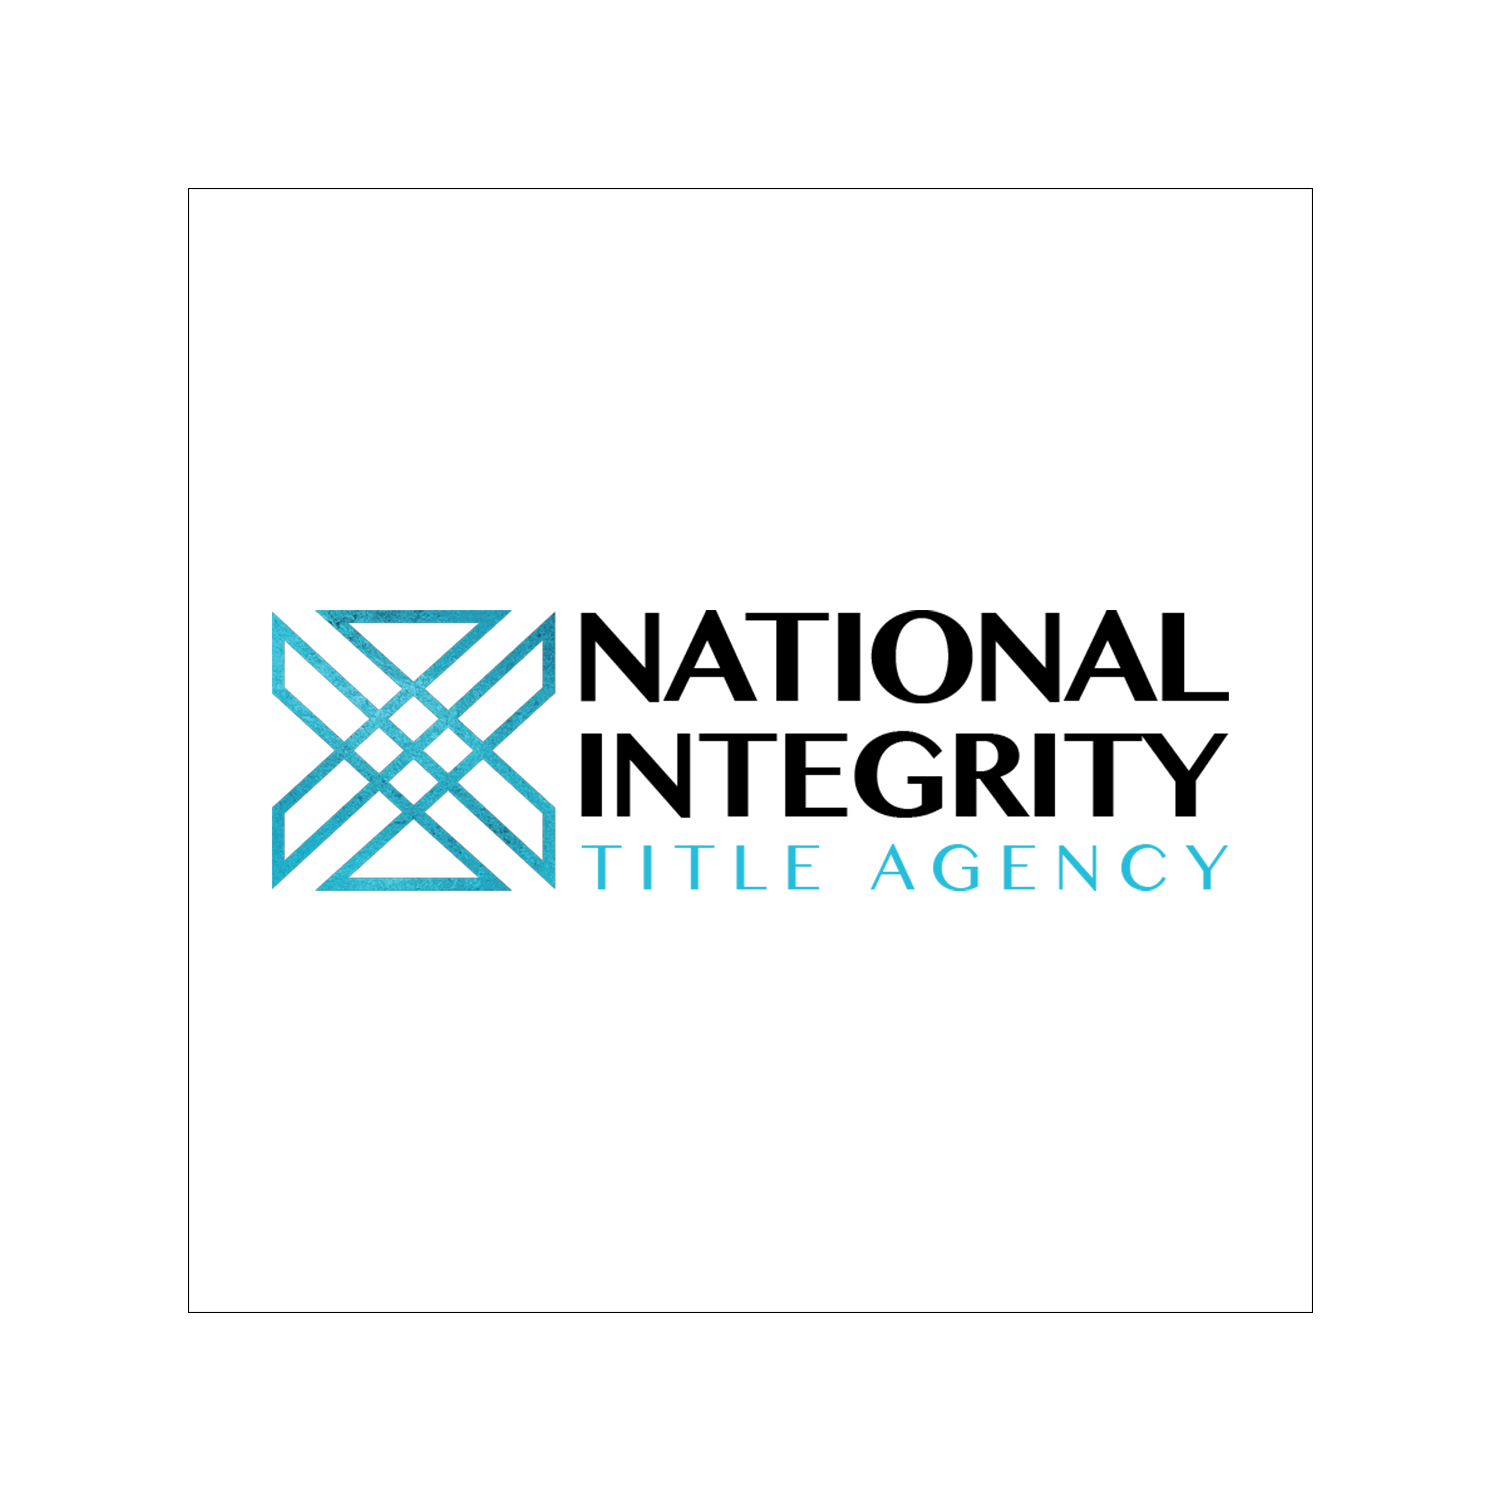 National Integrity Title Agency